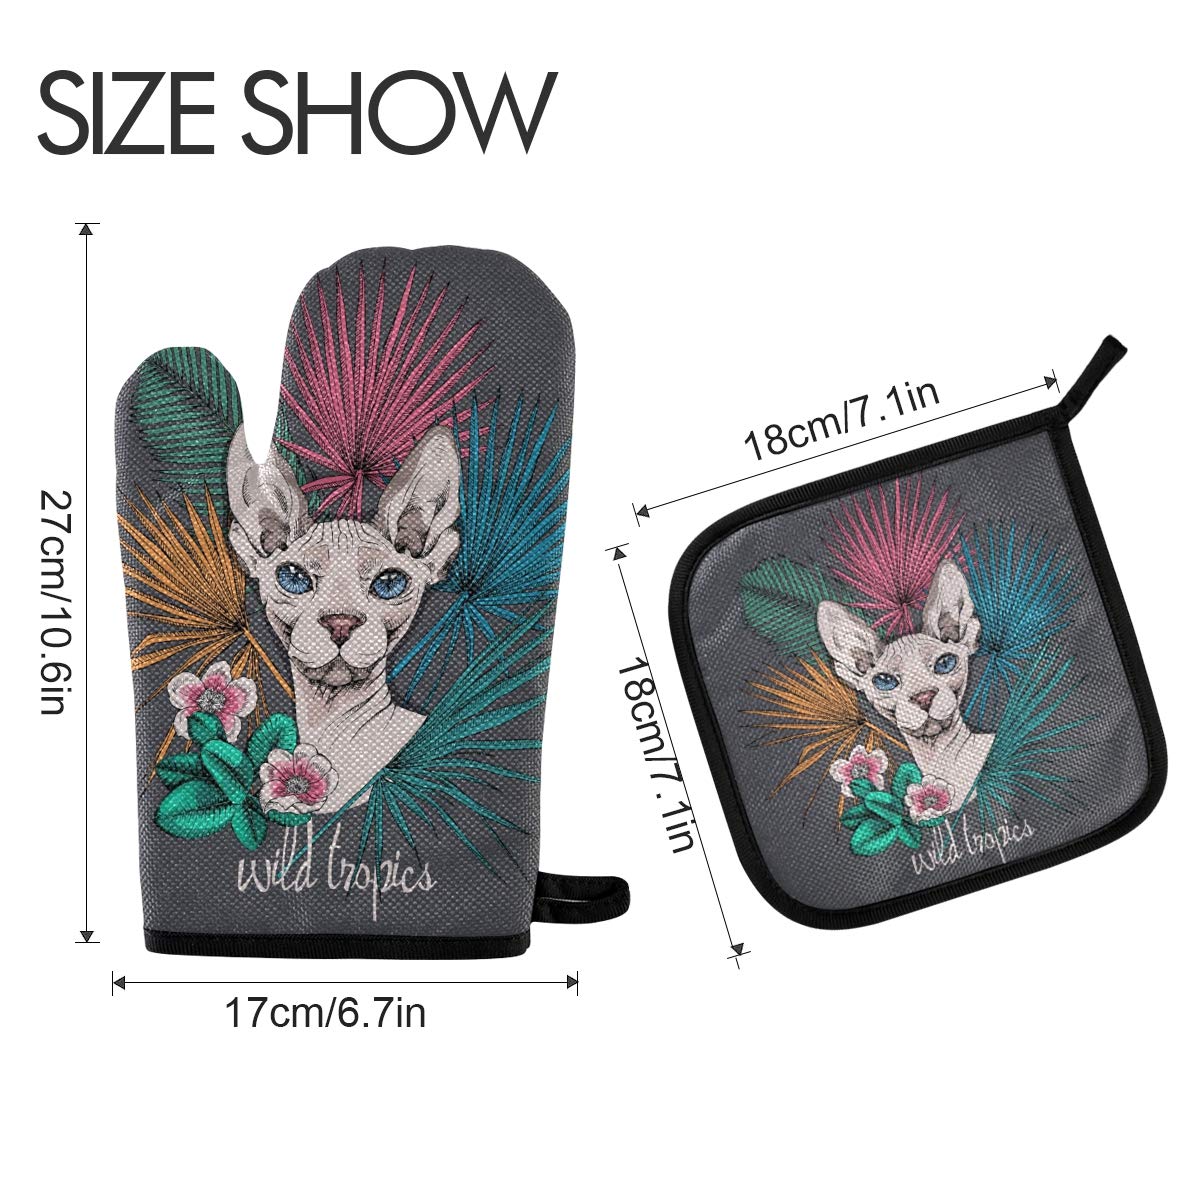 susiyo Oven Mitts and Pot Holders 2 Piece Set Sphynx Cat Tropical Leaves Heat Resistant Oven Gloves Non-Slip Textured Potholder for Microwave BBQ Cooking Baking Grilling